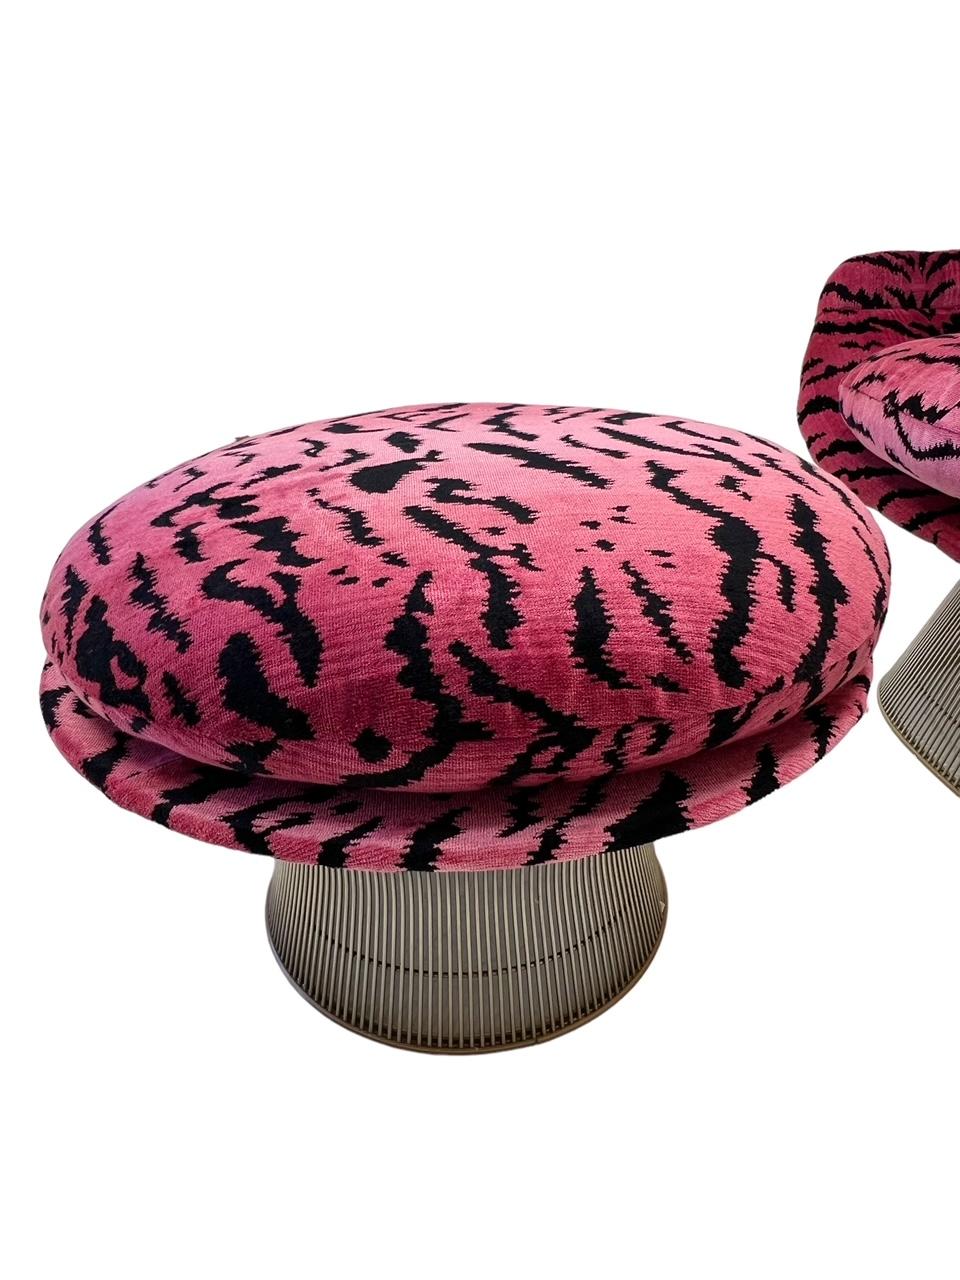 Metal Warren Platner Easy Chair and Ottoman in Scalamandre Pink Tigre Fabric For Sale